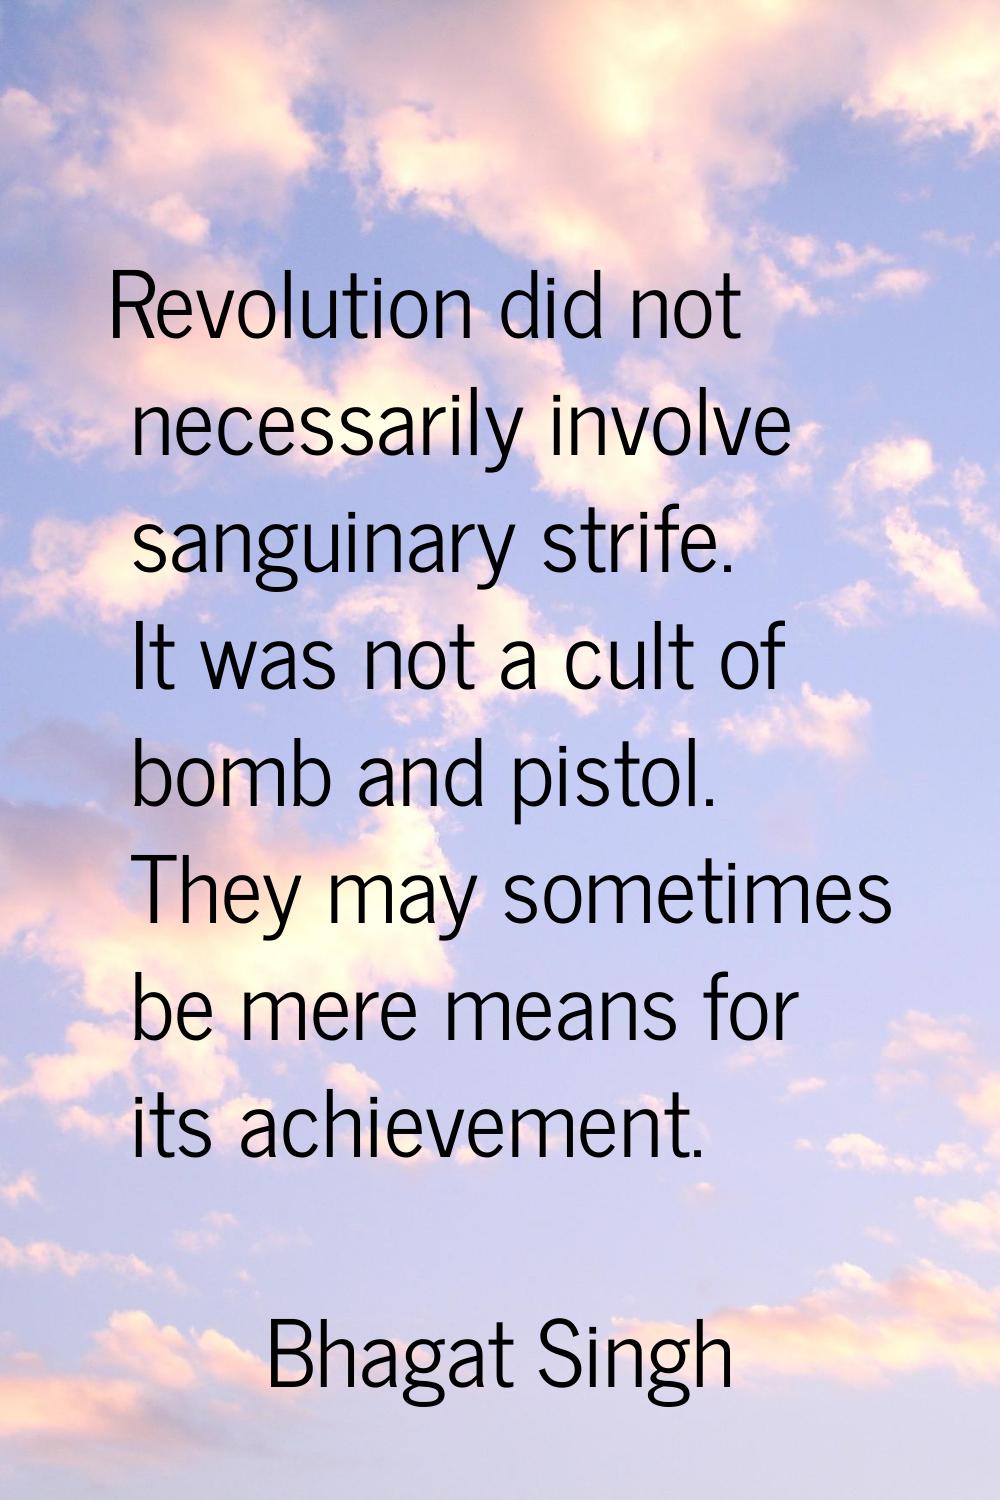 Revolution did not necessarily involve sanguinary strife. It was not a cult of bomb and pistol. The